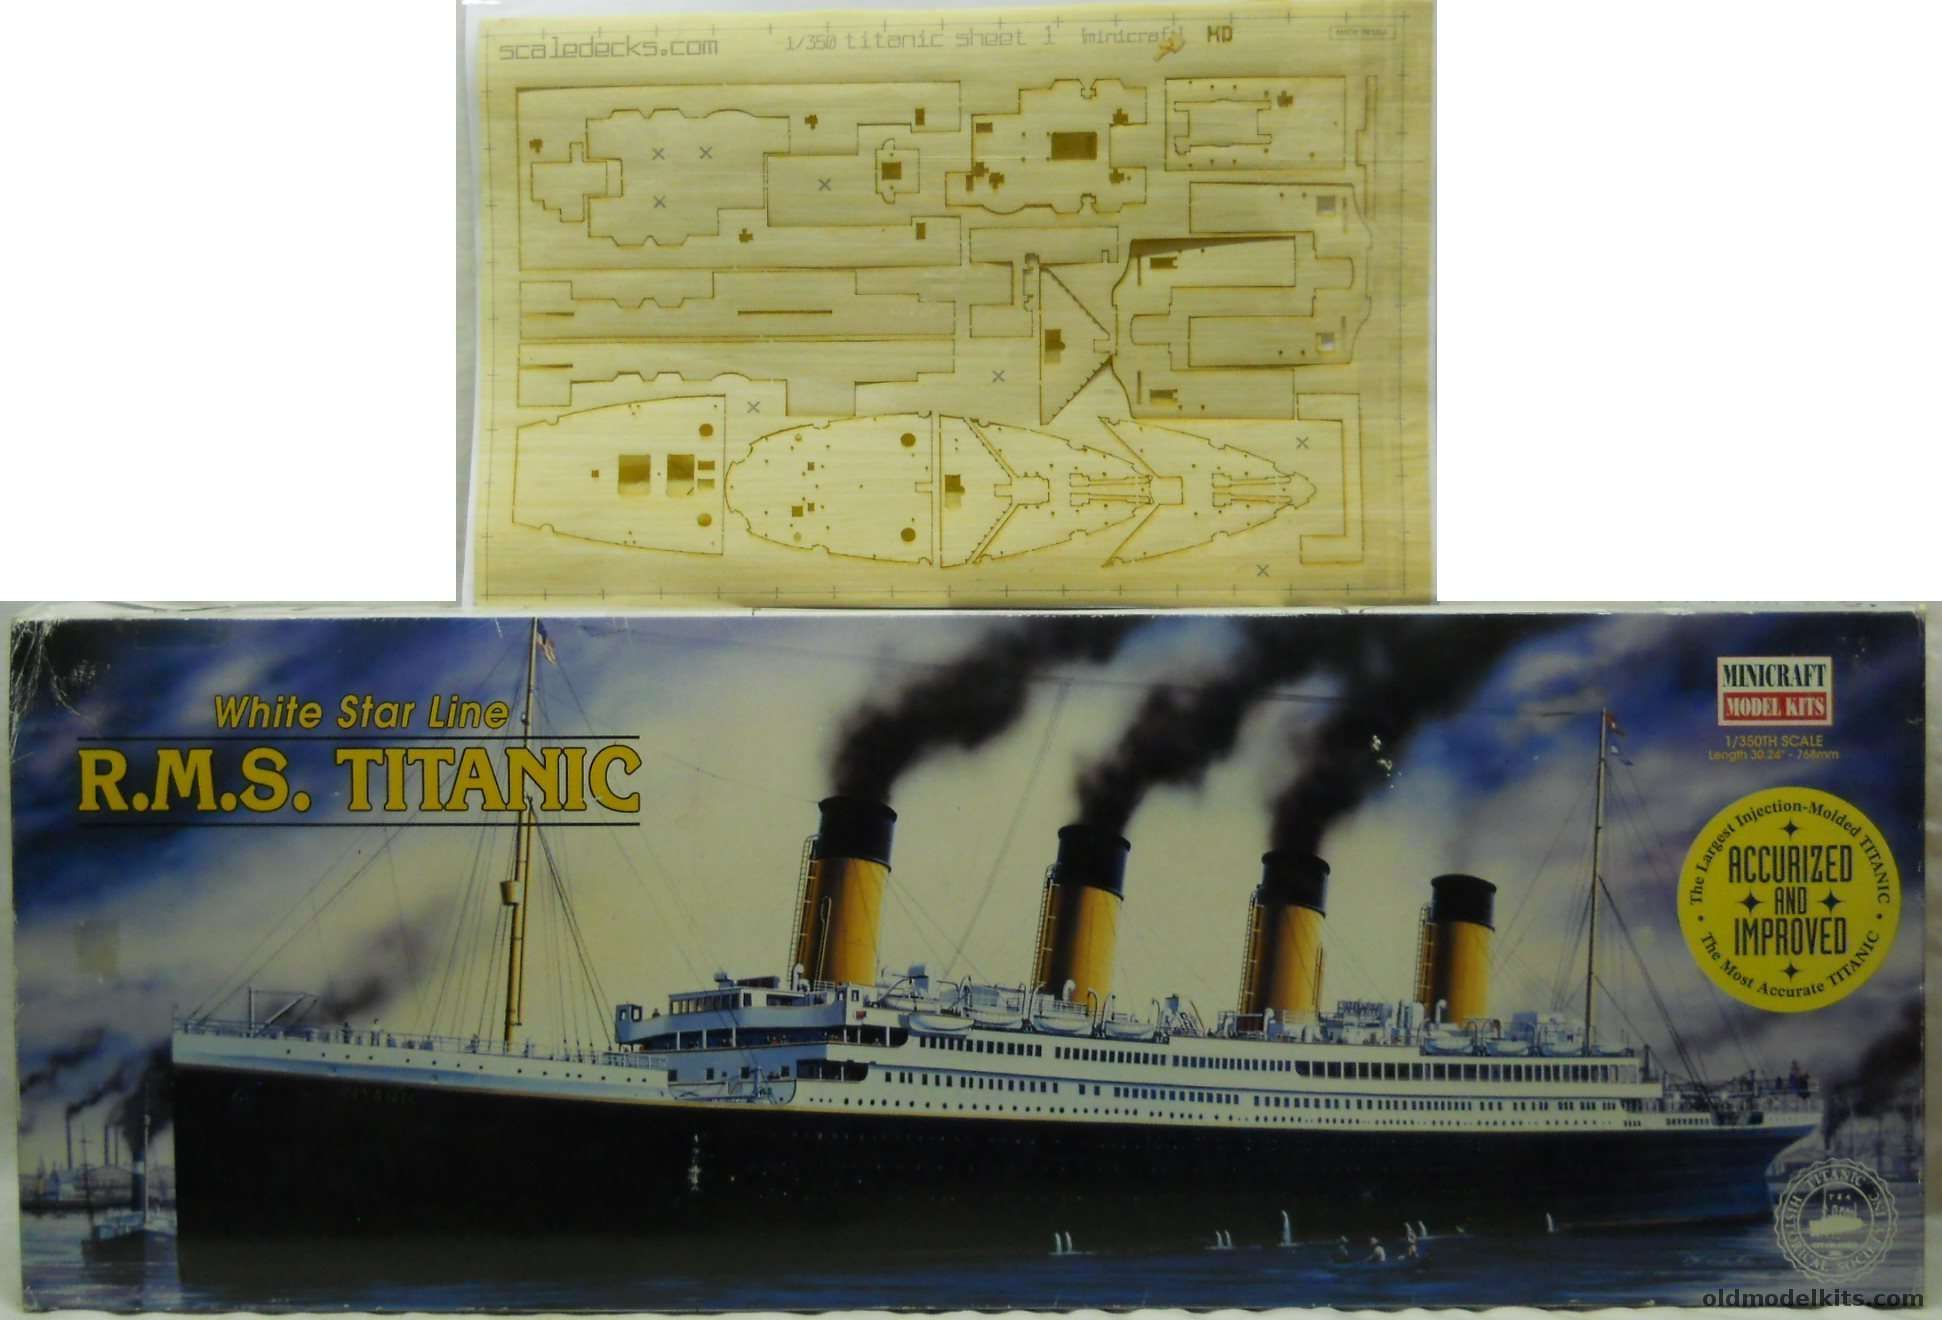 Minicraft 1/350 RMS Titanic With ScaleDecks Real Wood Deck - Accurized and Improved Issue, 11312 plastic model kit